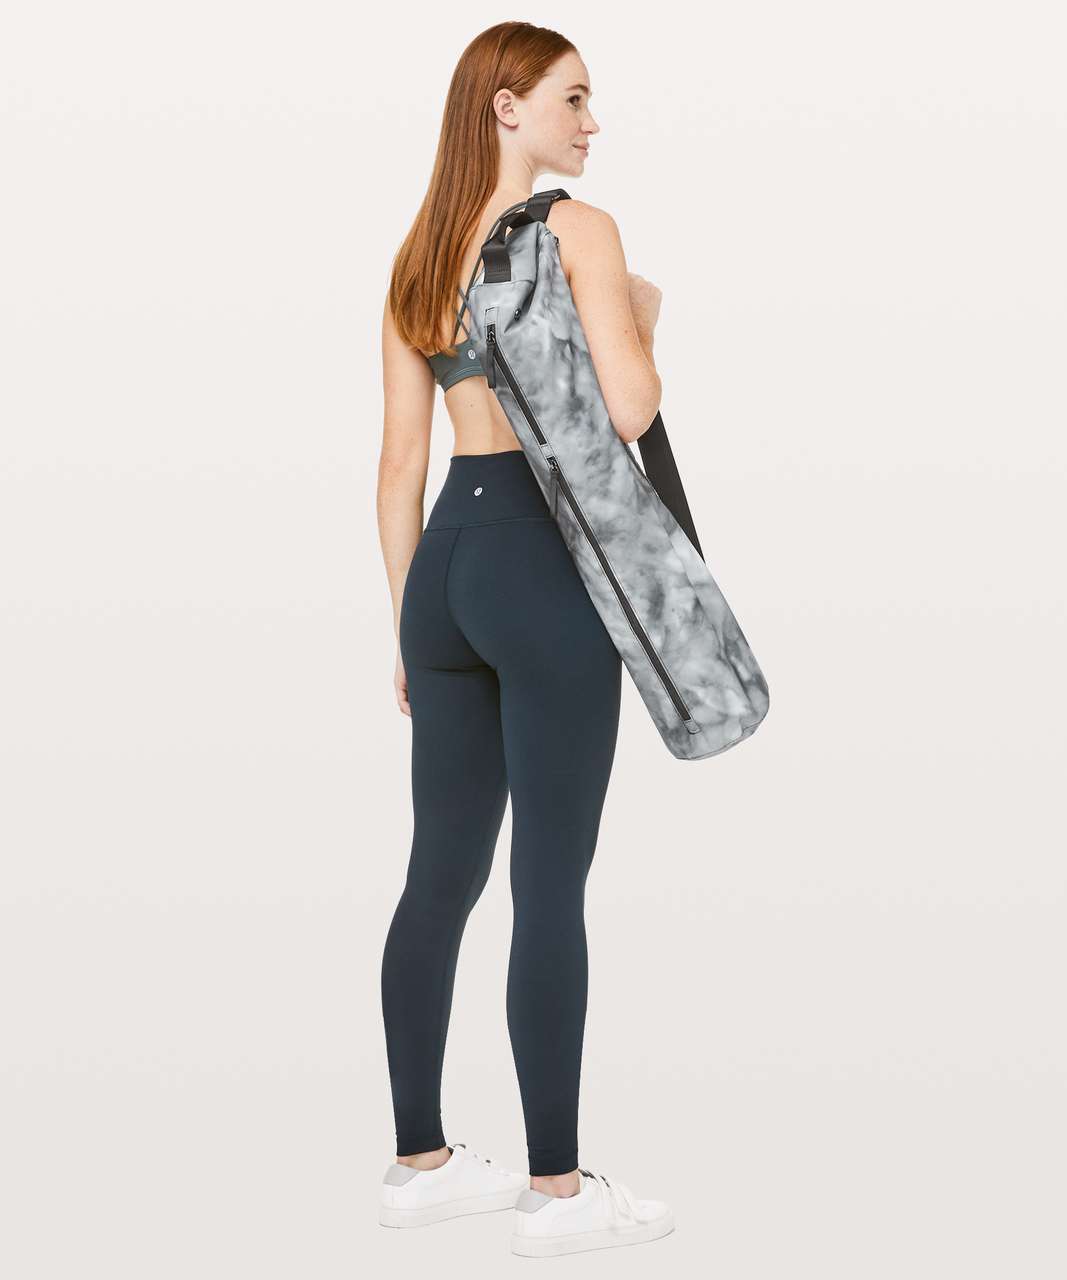 Lululemon Bag With Yoga Mat Holder  International Society of Precision  Agriculture